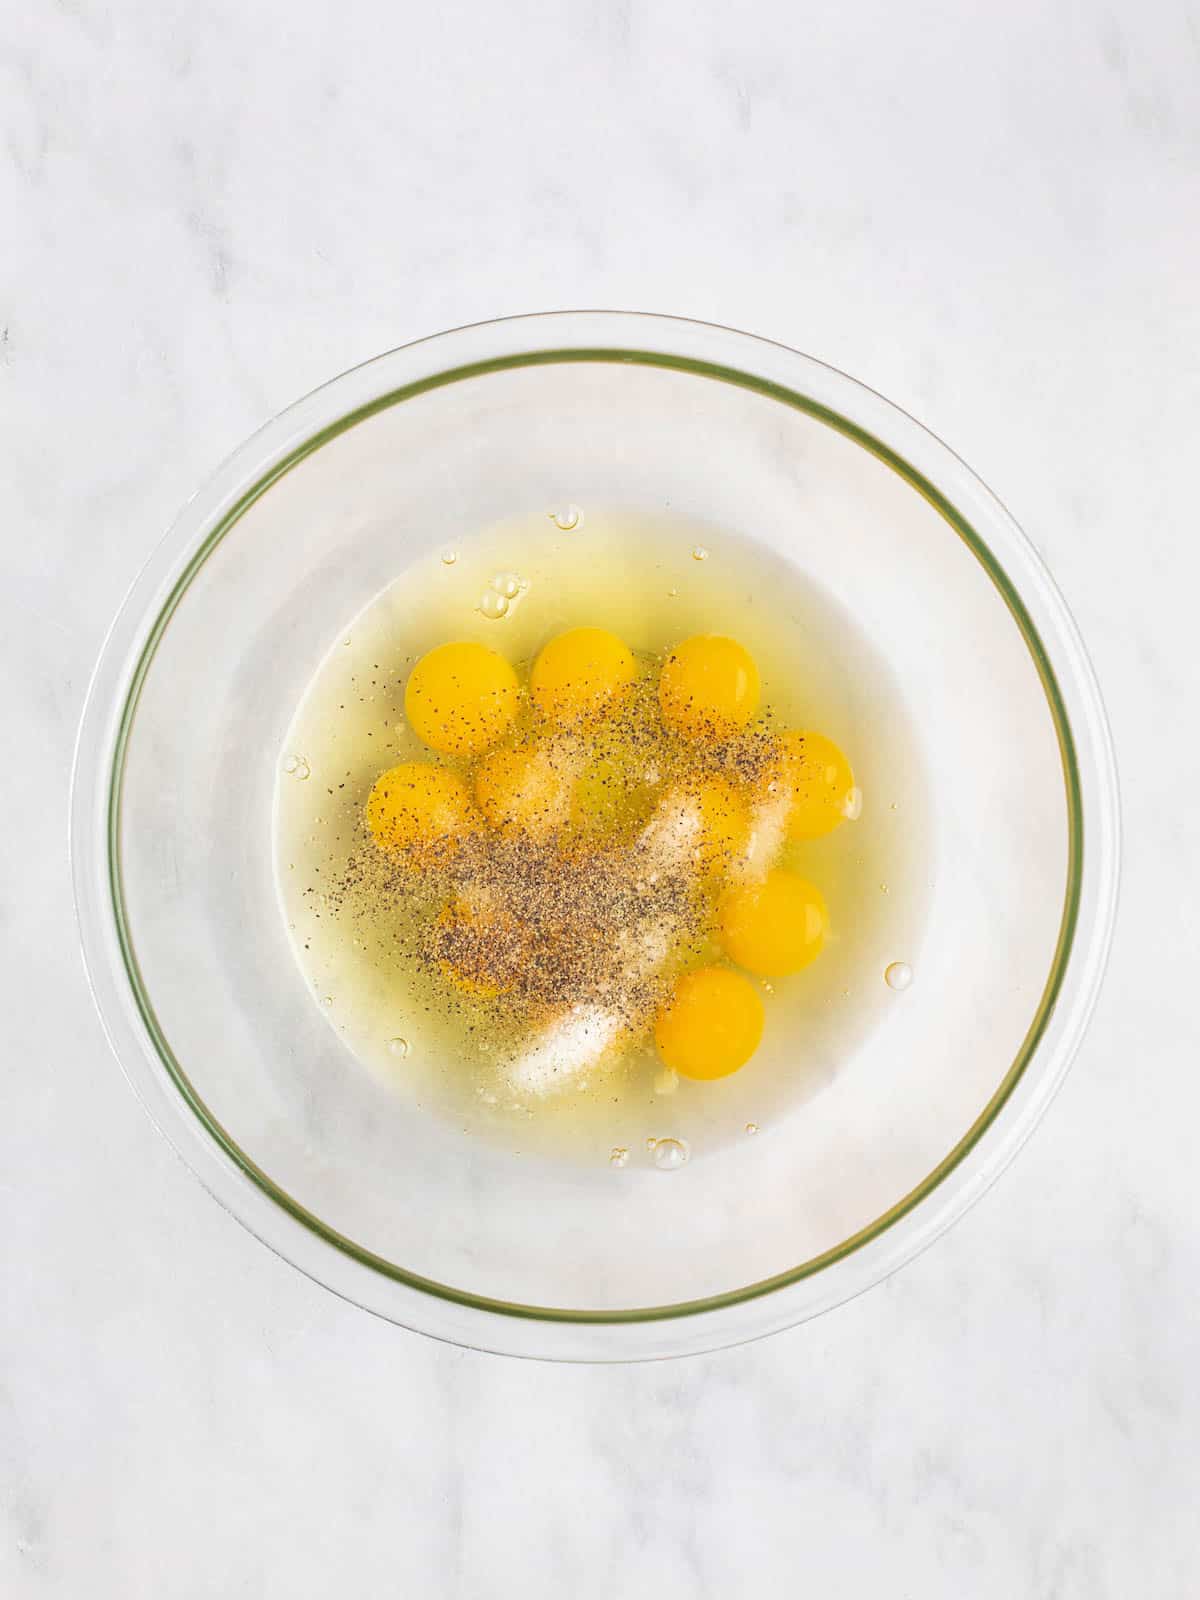 Eggs, salt, and pepper in a large glass bowl.